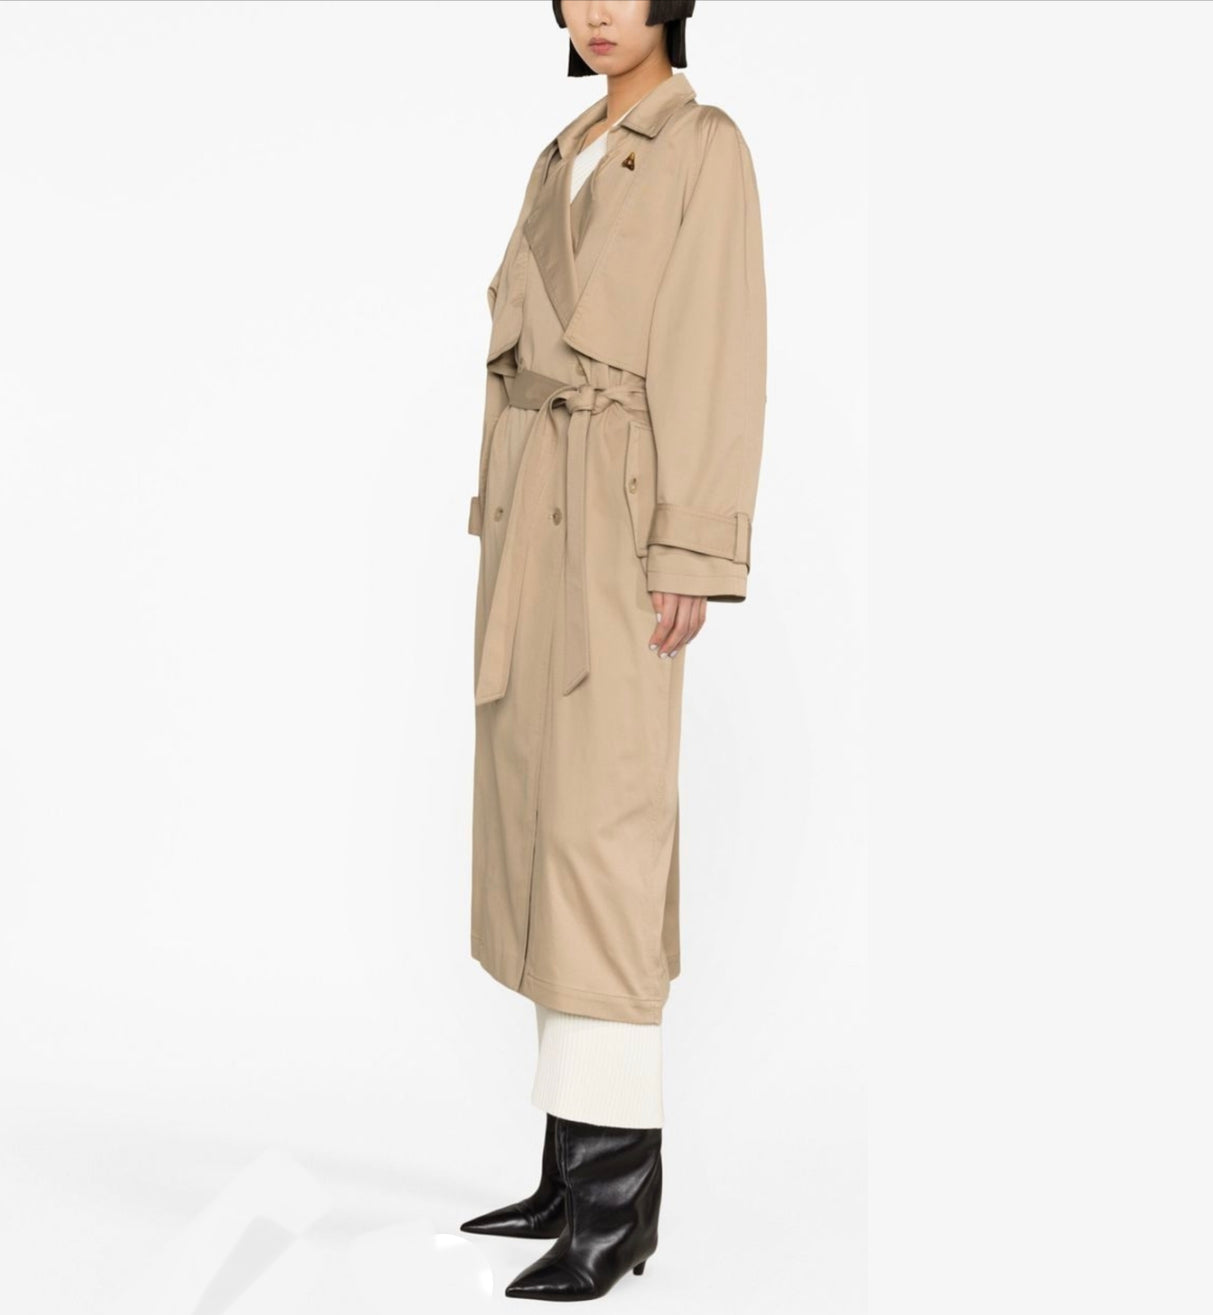 Aeron Natural Belted Trench - current season new